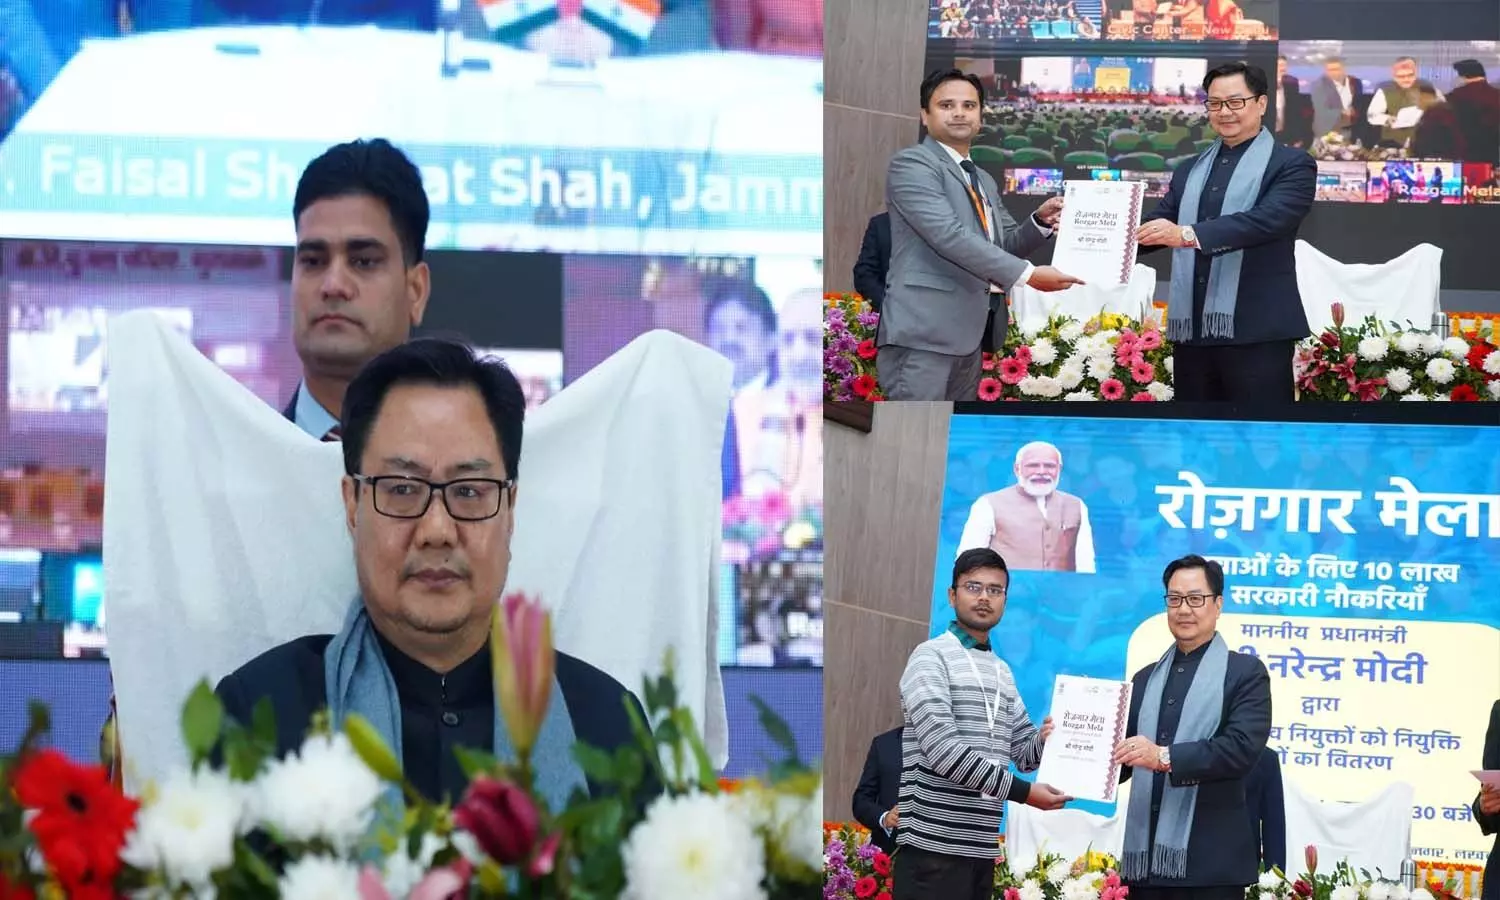 Union Minister Kiren Rijiju distributed appointment letters to 192 people in Lucknow